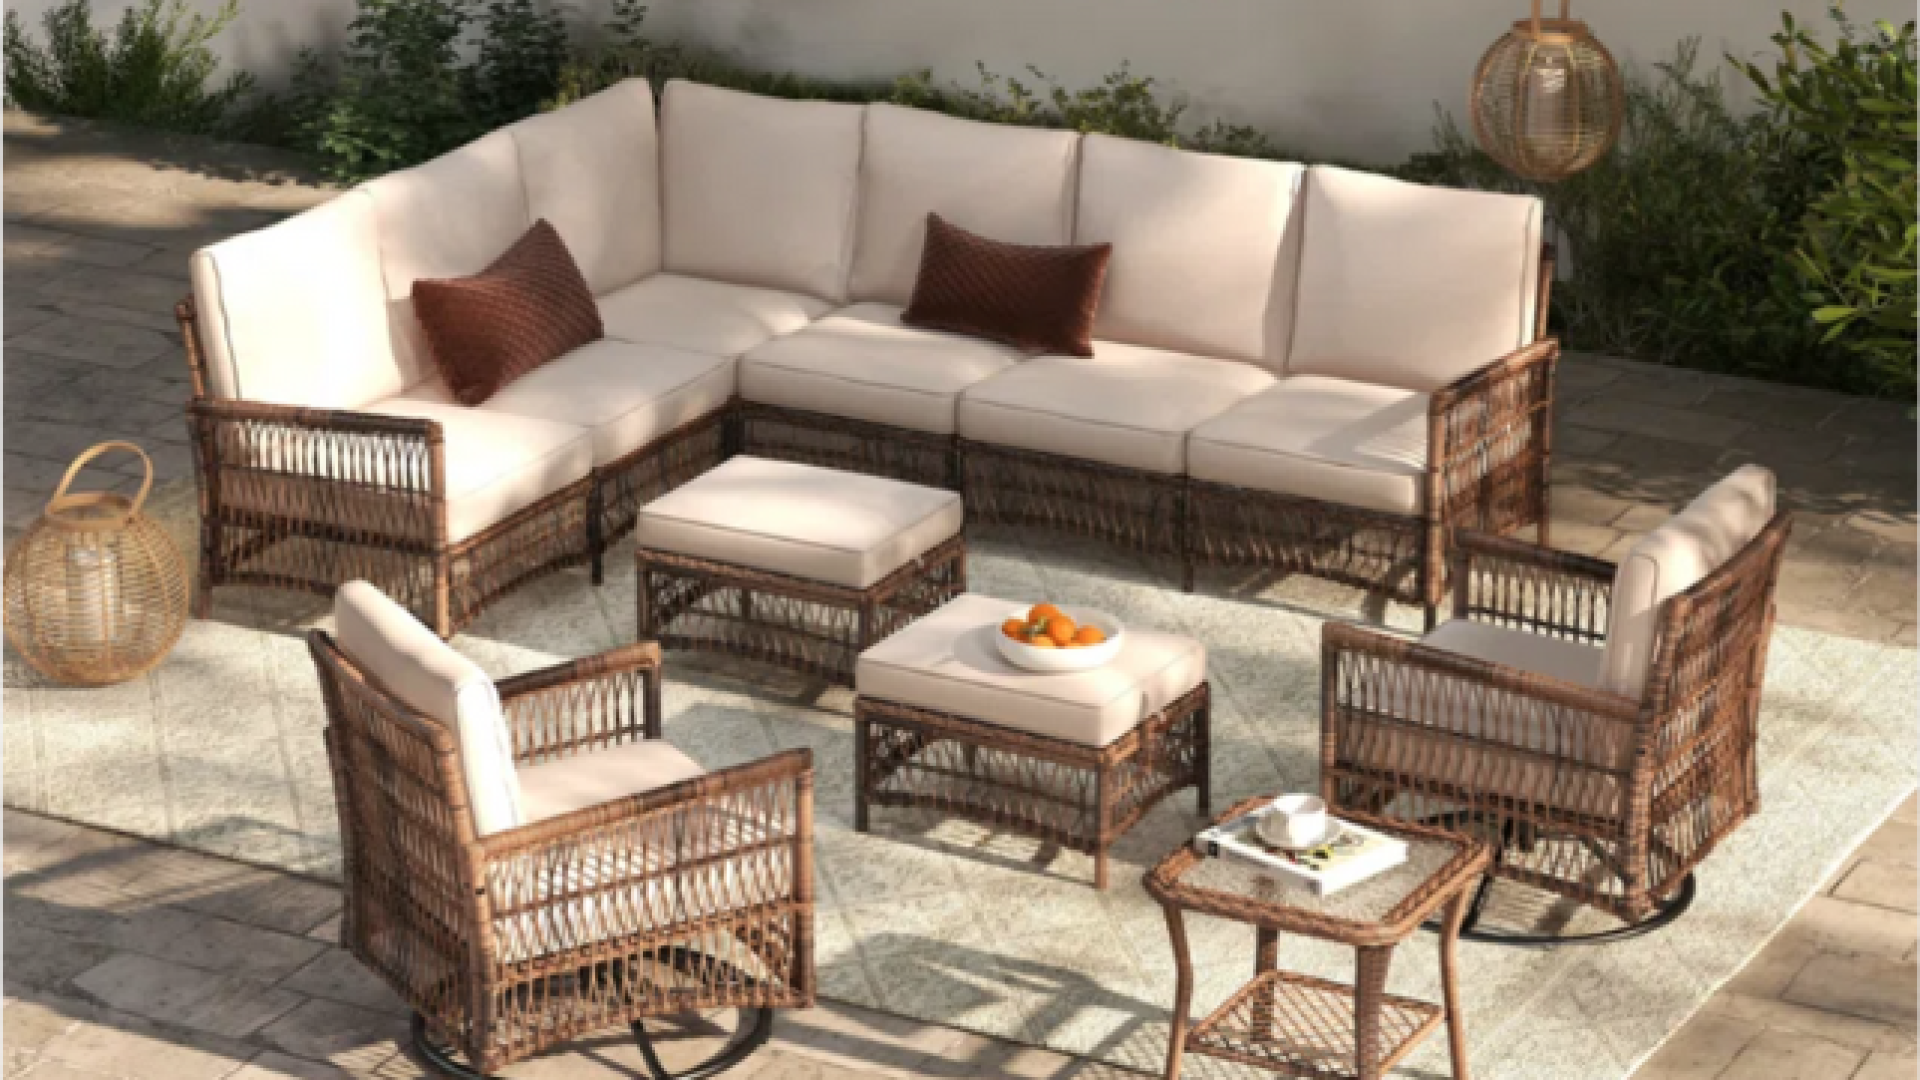 Found: Chic Patio Sets For 4th Of July Celebrations